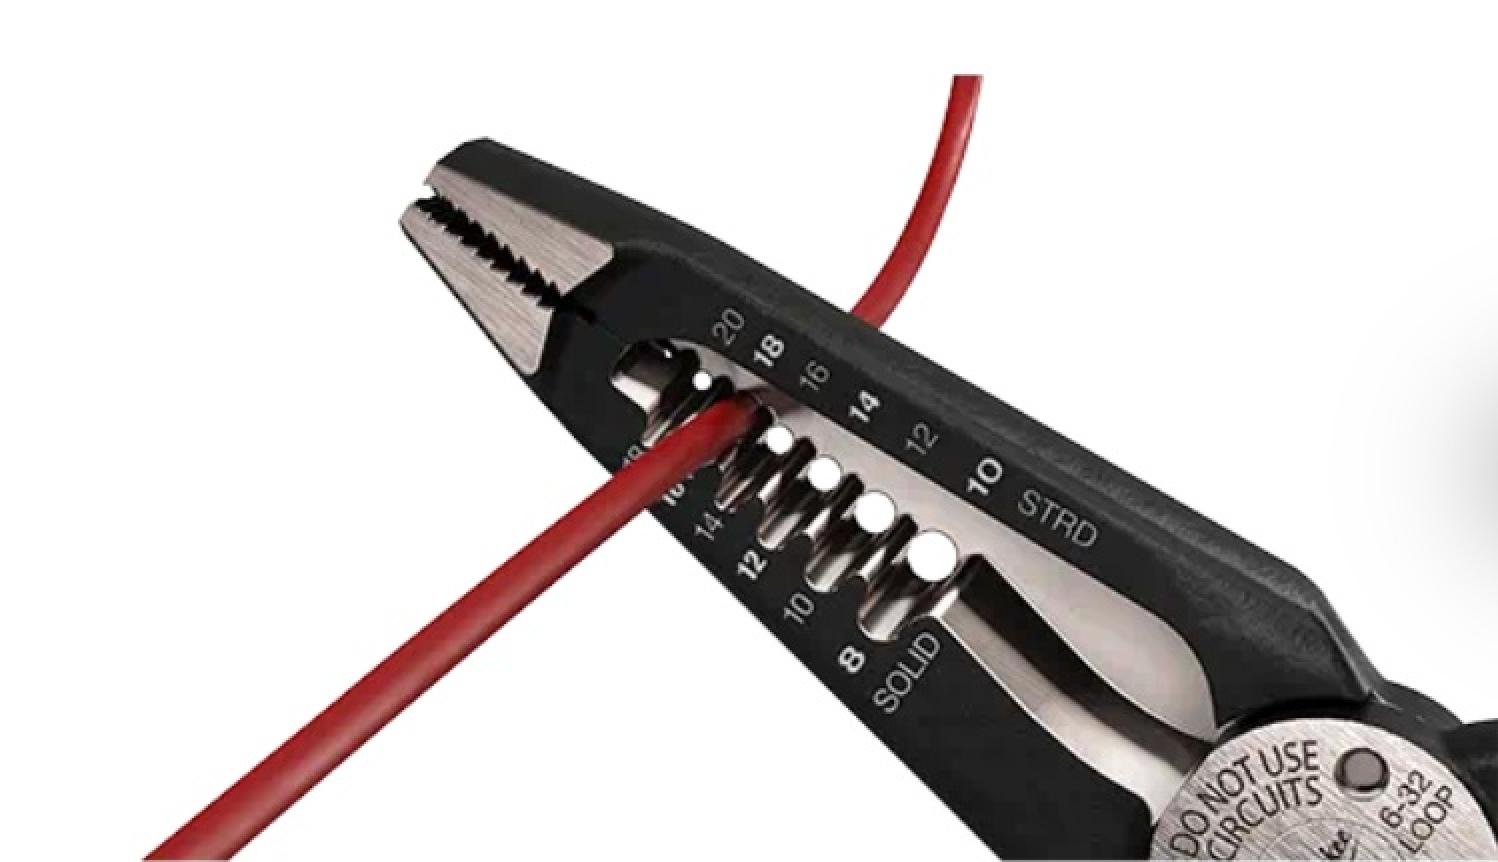 Milwaukee 7-in-1 High-Leverage Combination Pliers